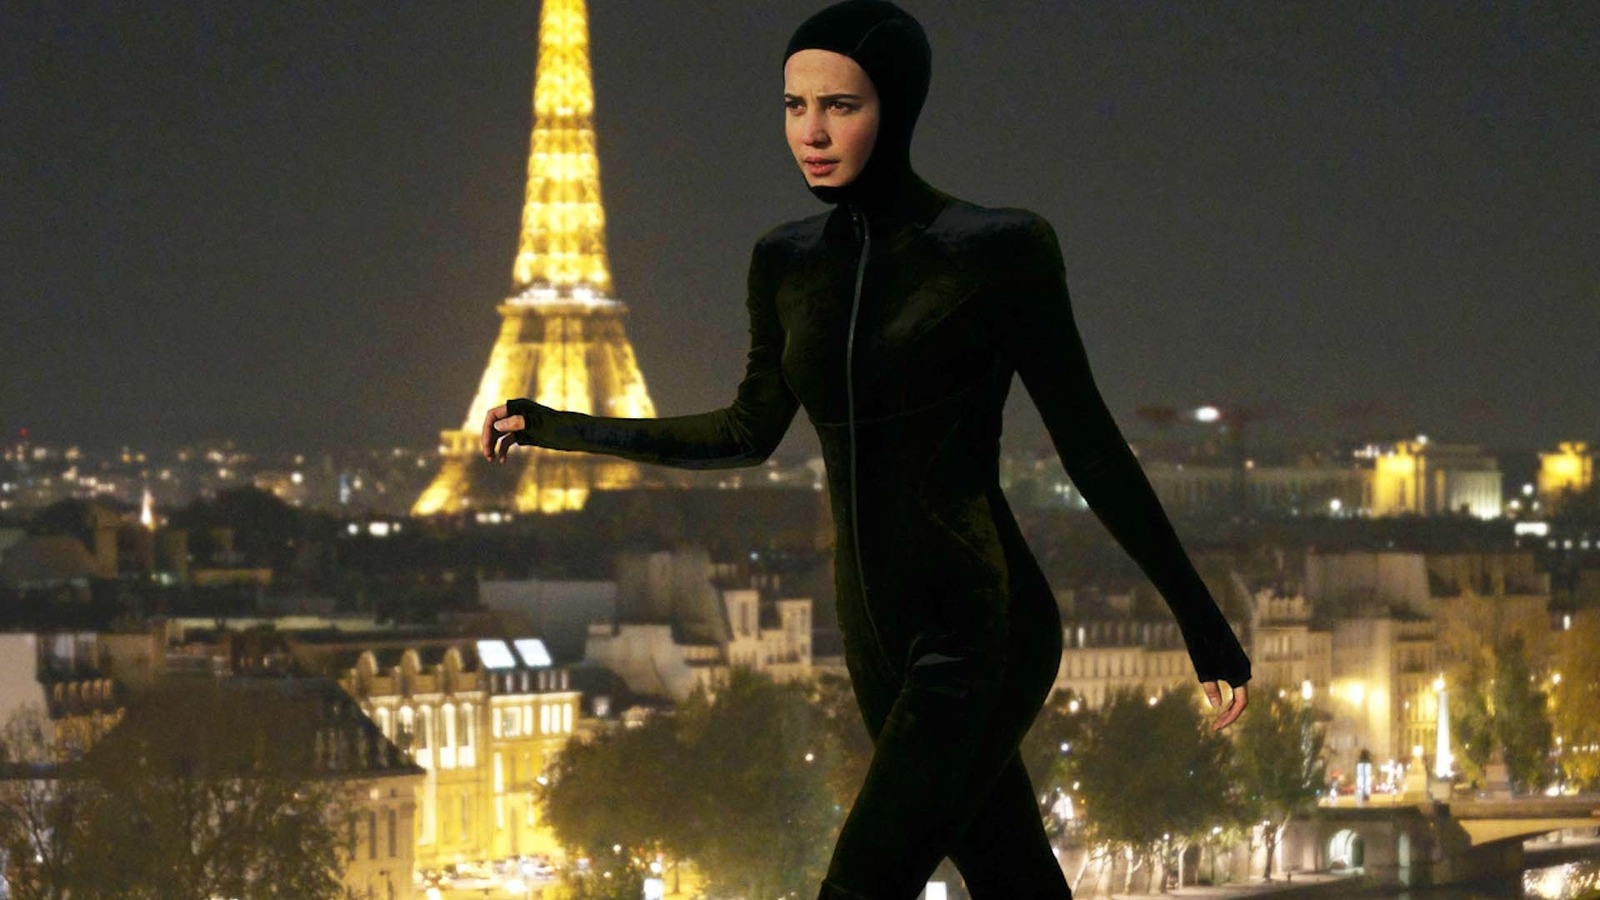 Why Olivier Assayas imagined his remake of Irma Vep as a series rather than a feature film